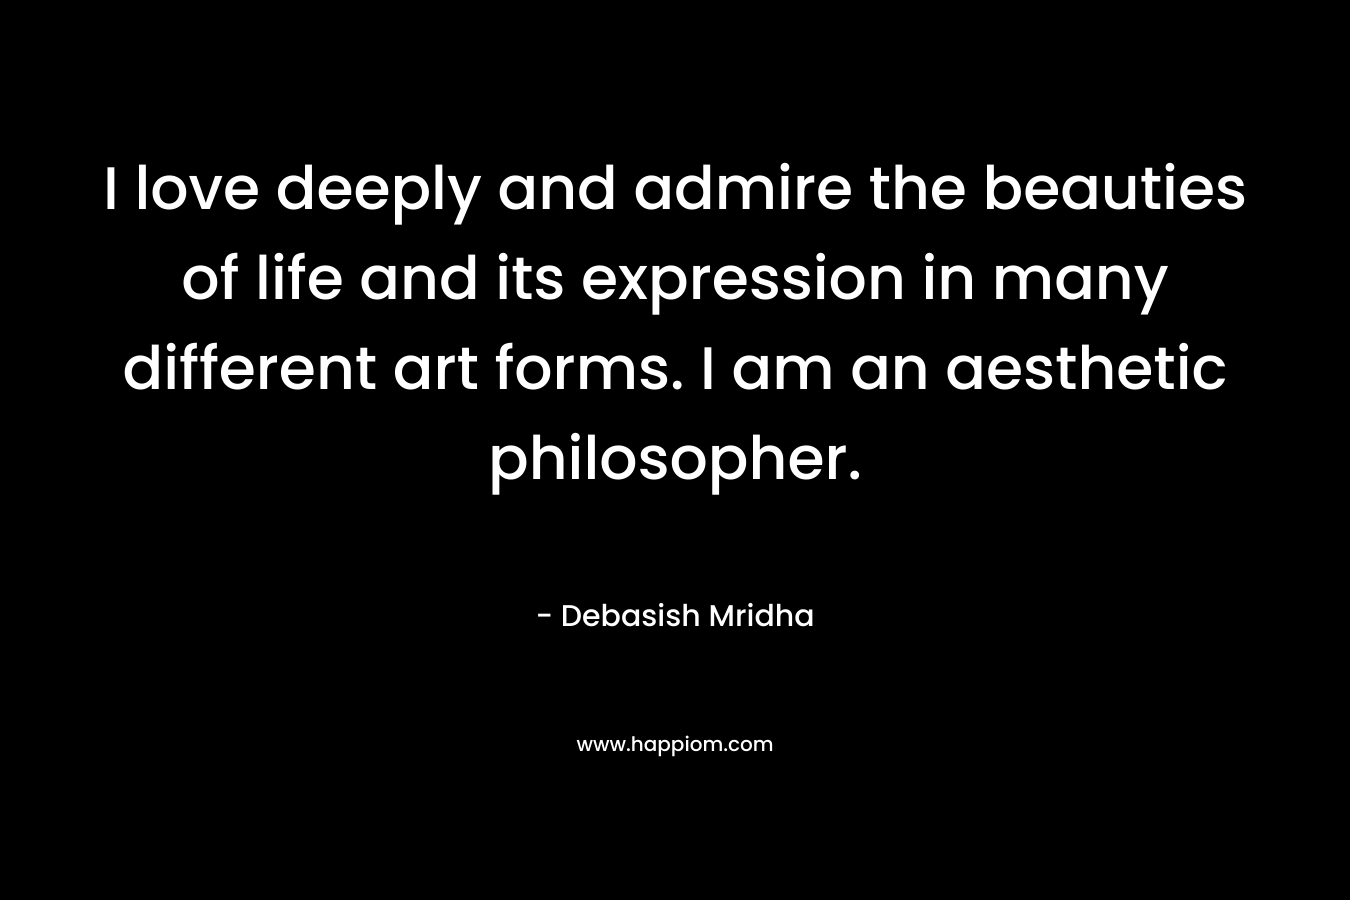 I love deeply and admire the beauties of life and its expression in many different art forms. I am an aesthetic philosopher.